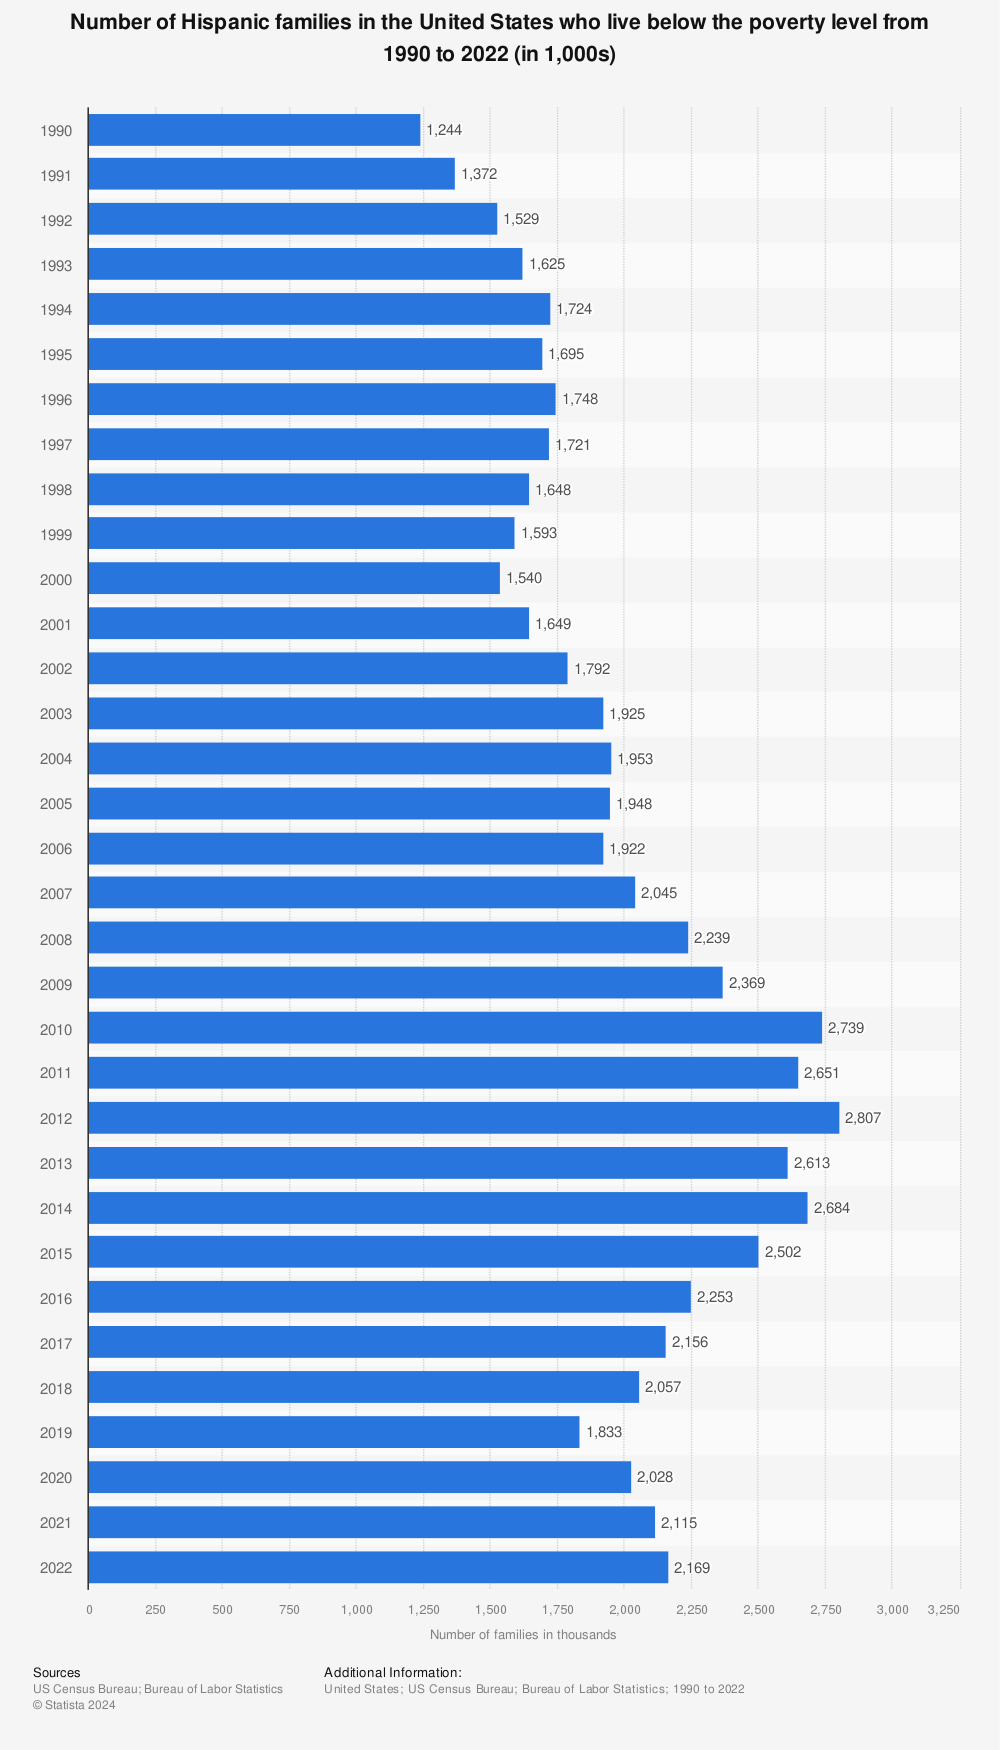 Statistic: Number of Hispanic families in the United States who live below the poverty level from 1990 to 2021 (in 1,000s) | Statista